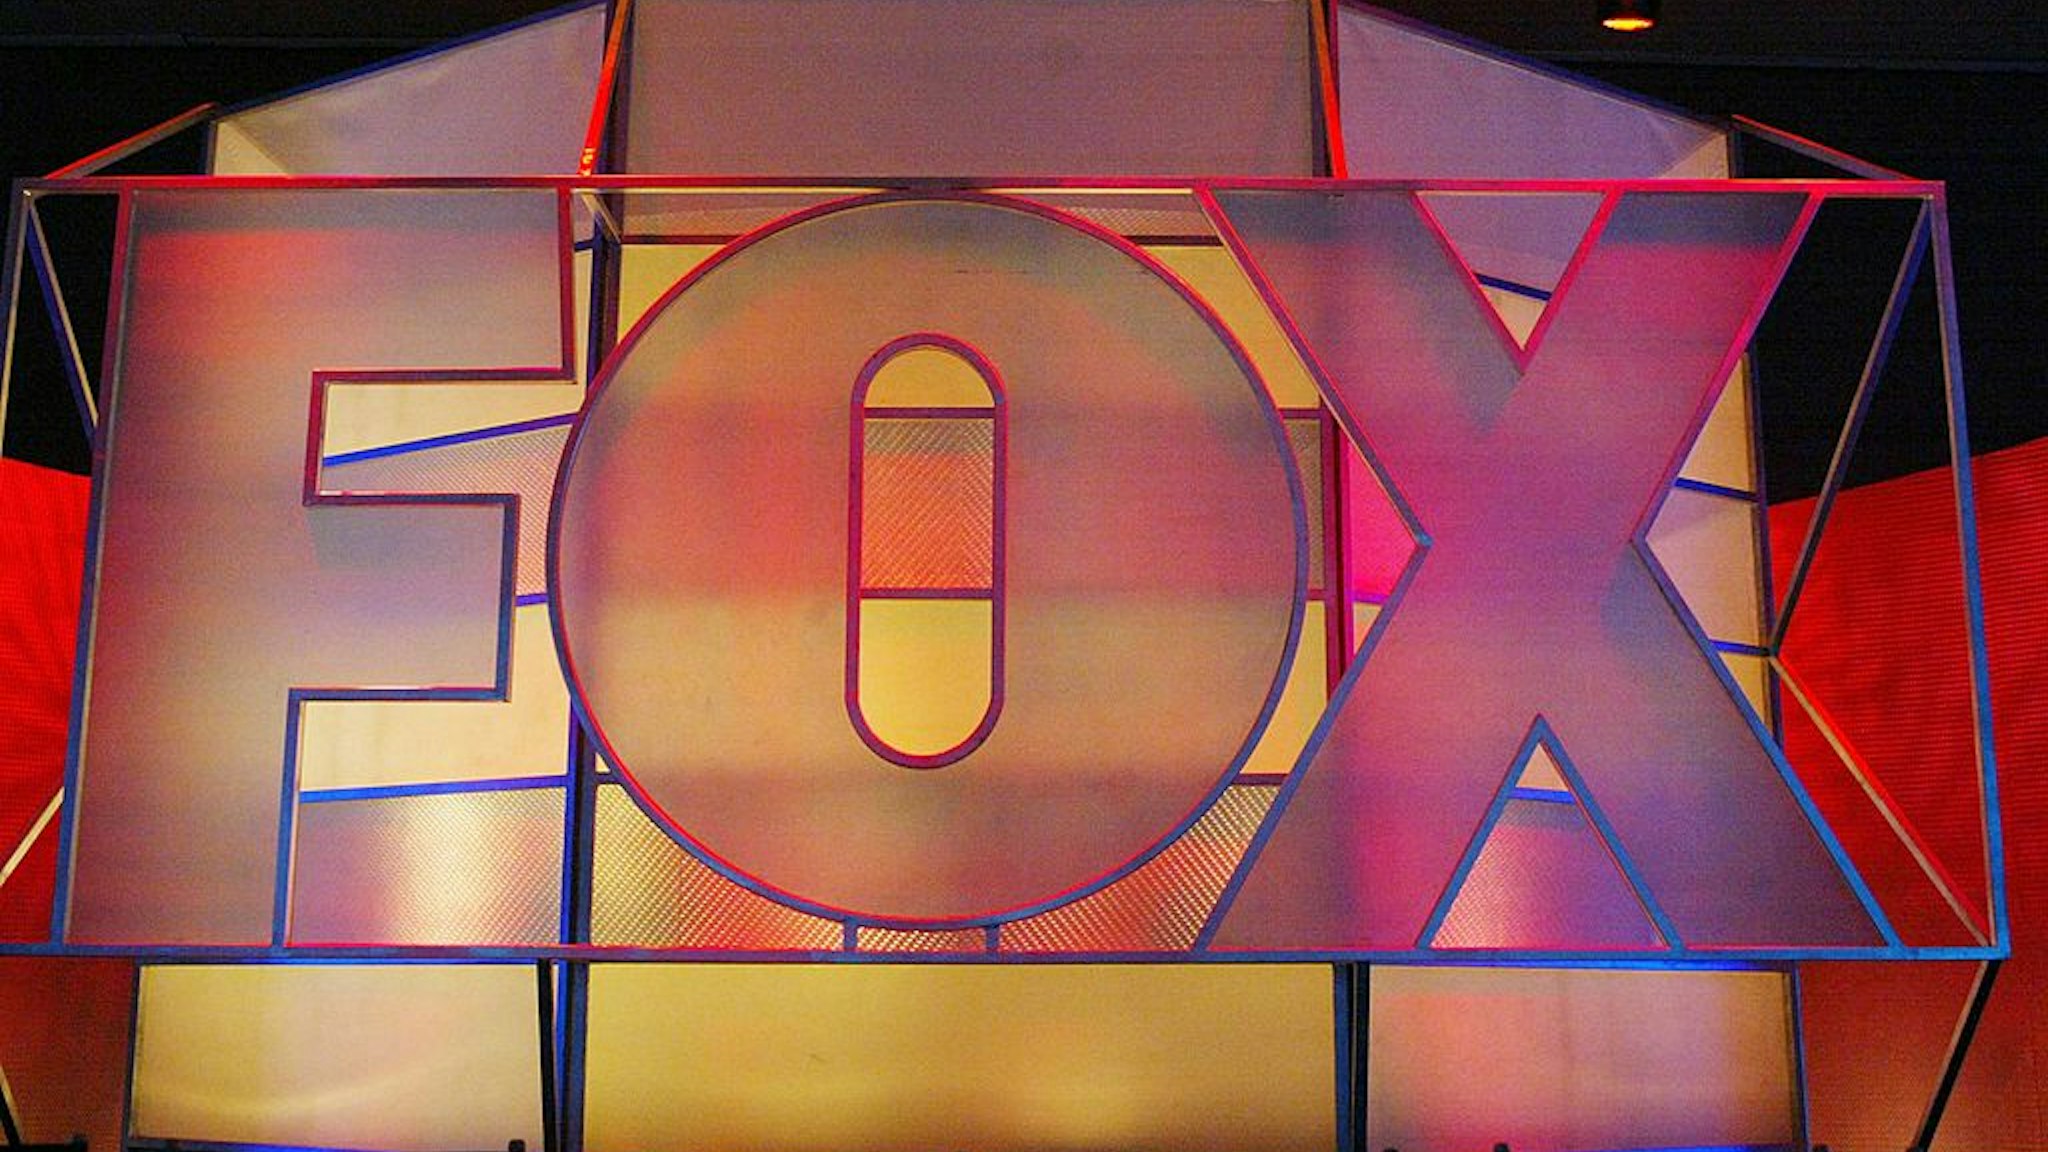 UNIVERSAL CITY, CA - JANUARY 17: The Fox Network logo is displayed during the 2005 Television Critics Winter Press Tour at the Hilton Universal Hotel on January 17, 2005 in Universal City, California. (Photo by Frederick M. Brown/Getty Images)